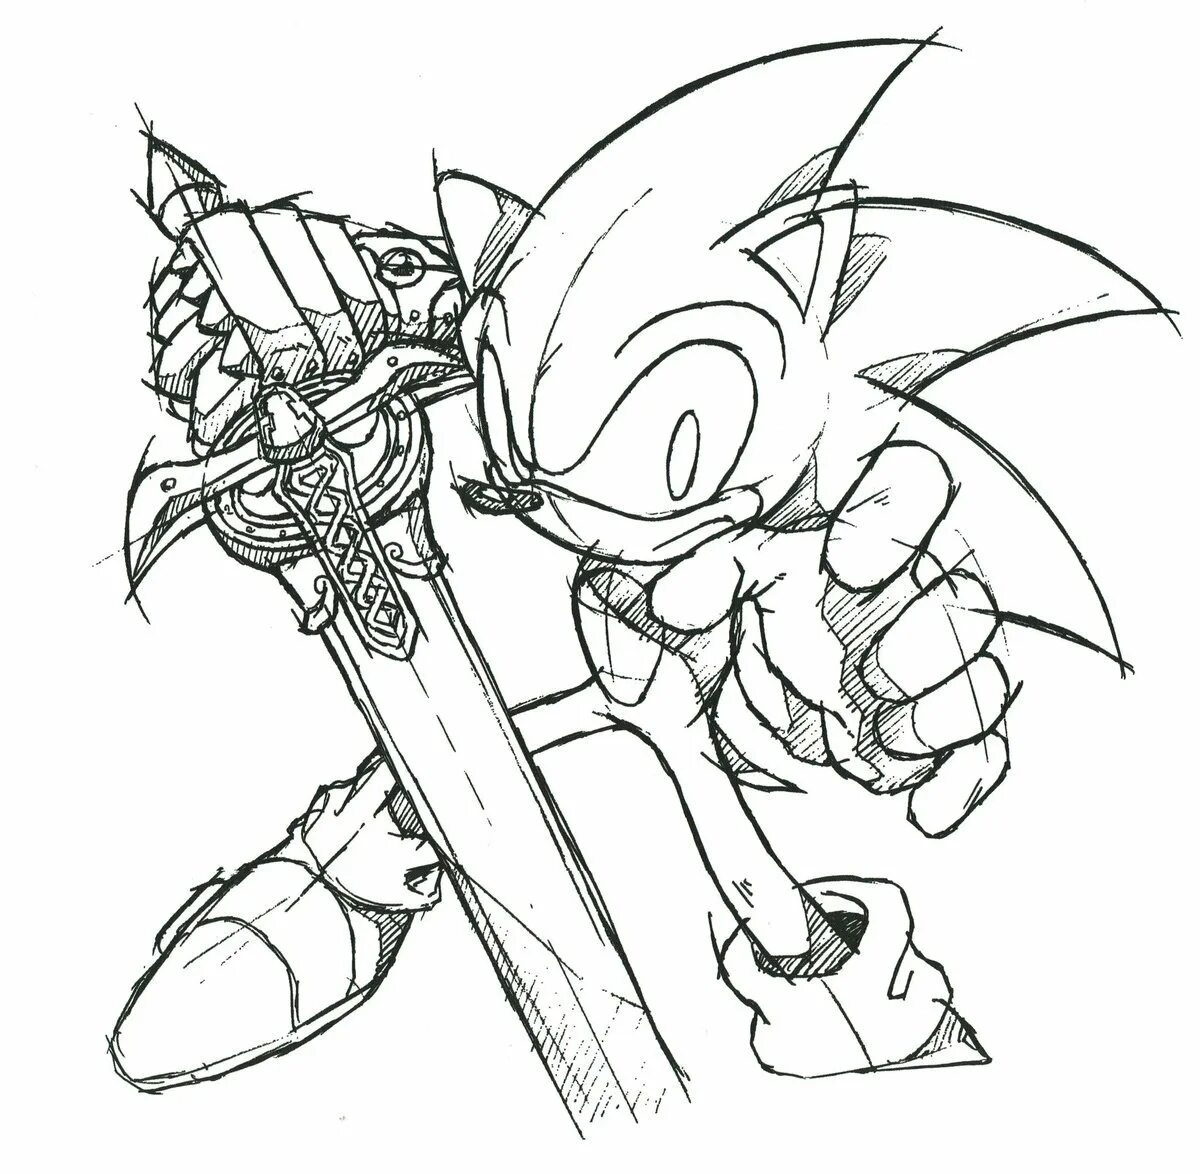 Excalibur sonic coloring book with colorful ink